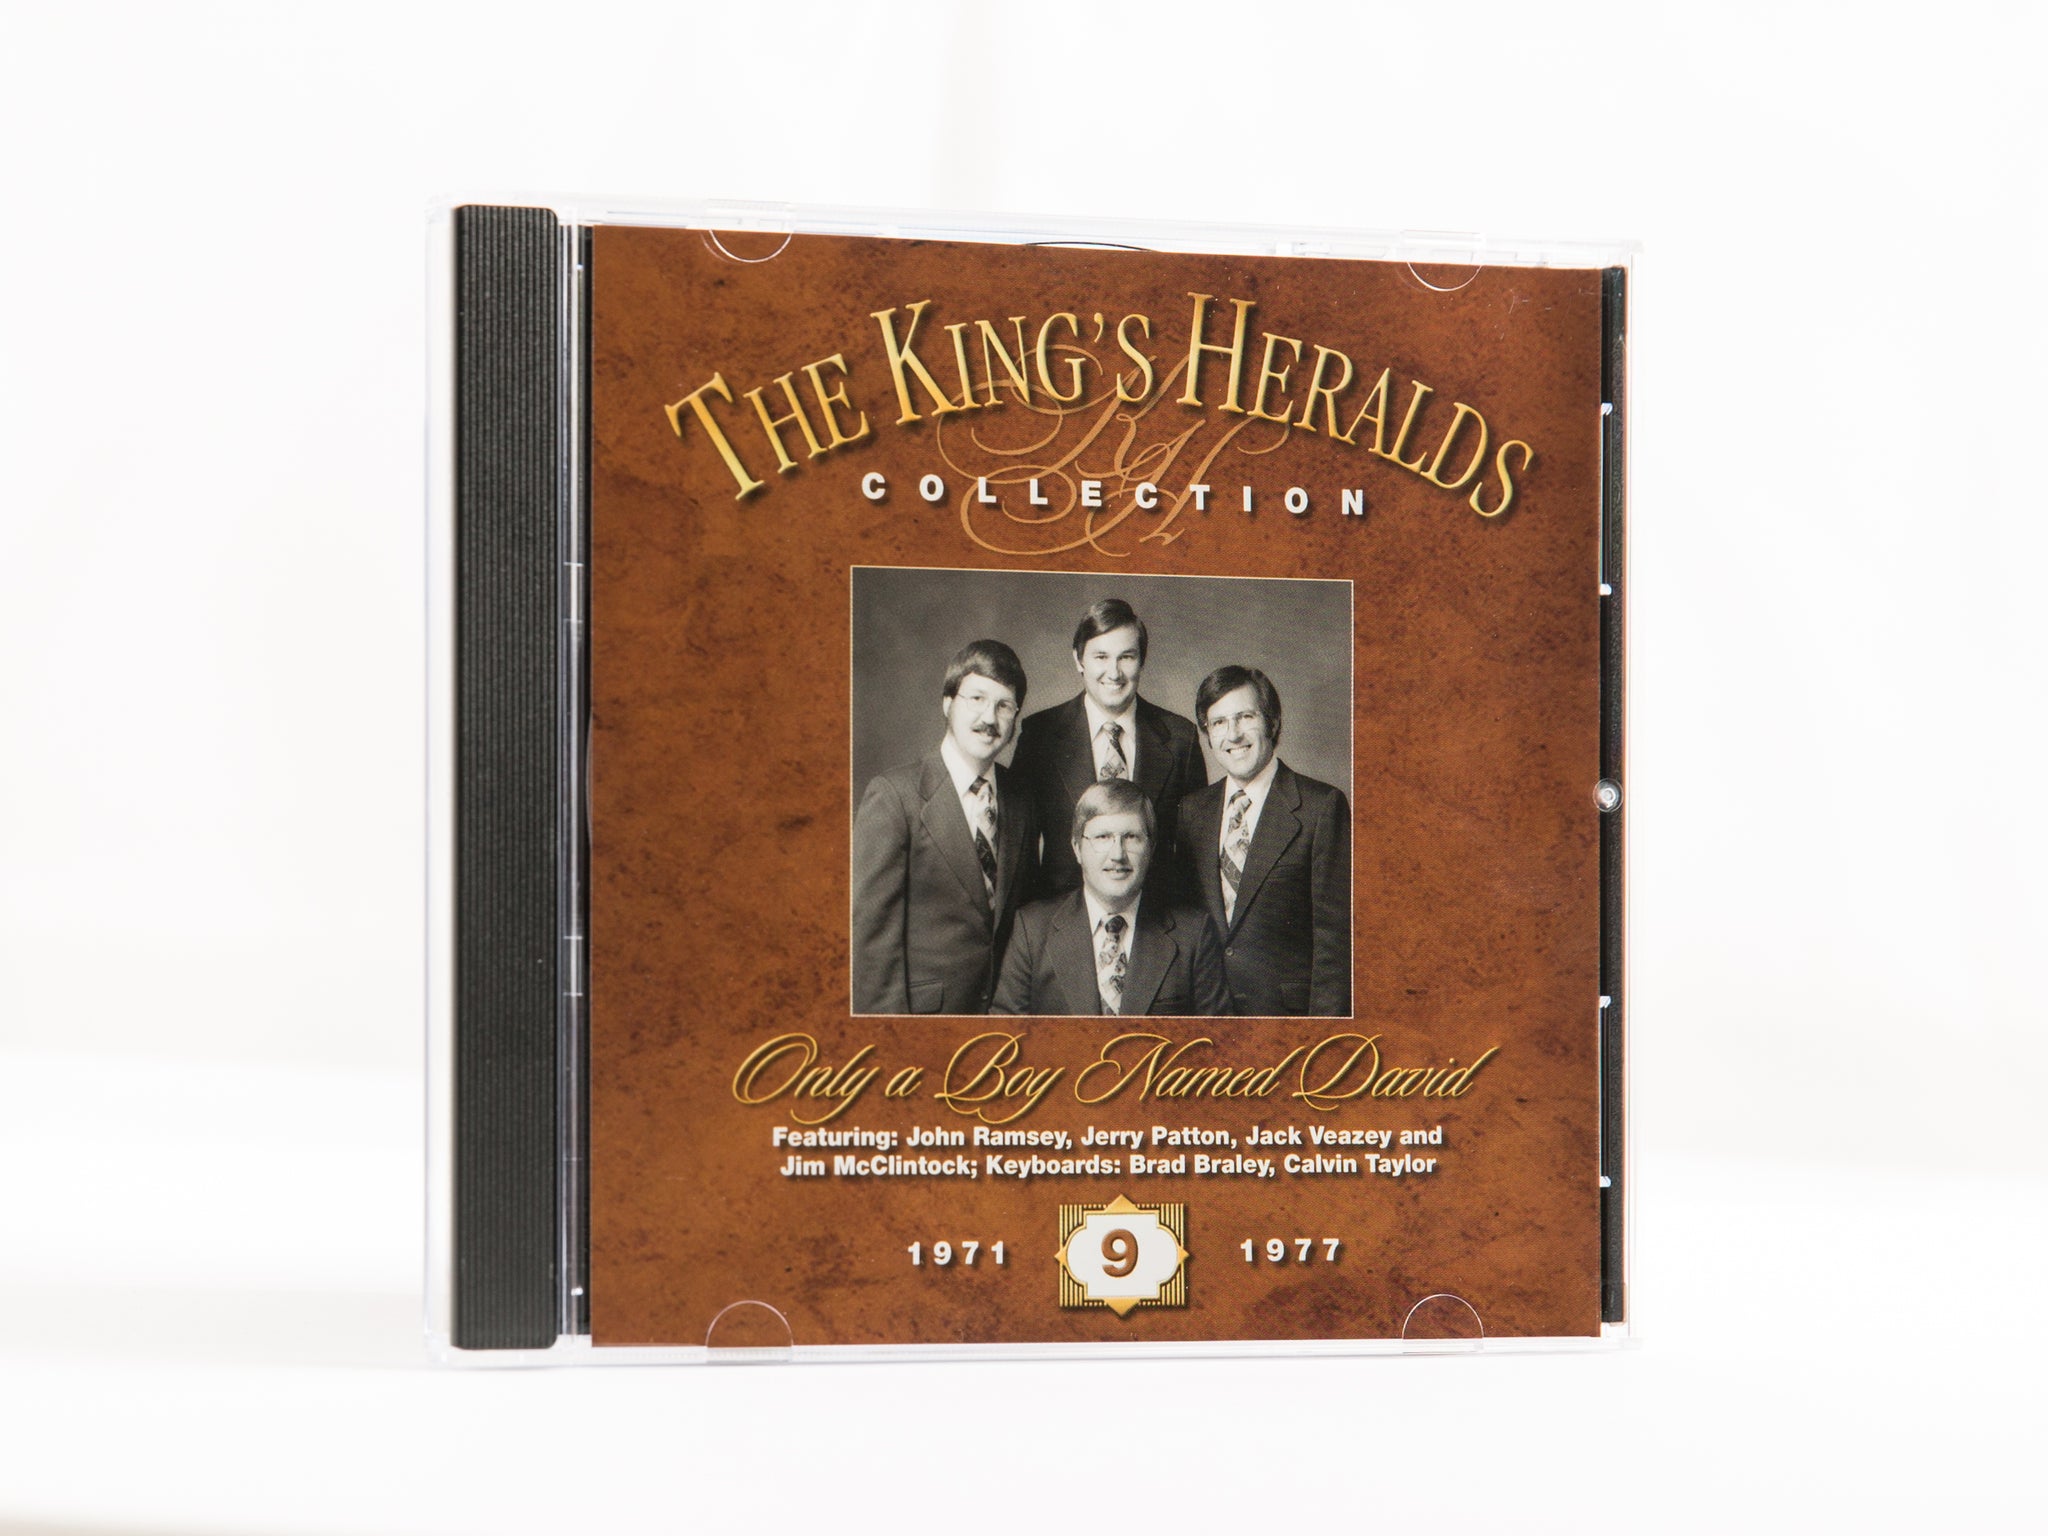 King's Heralds CD Collection - Vol. 9 - Only a Boy Named David